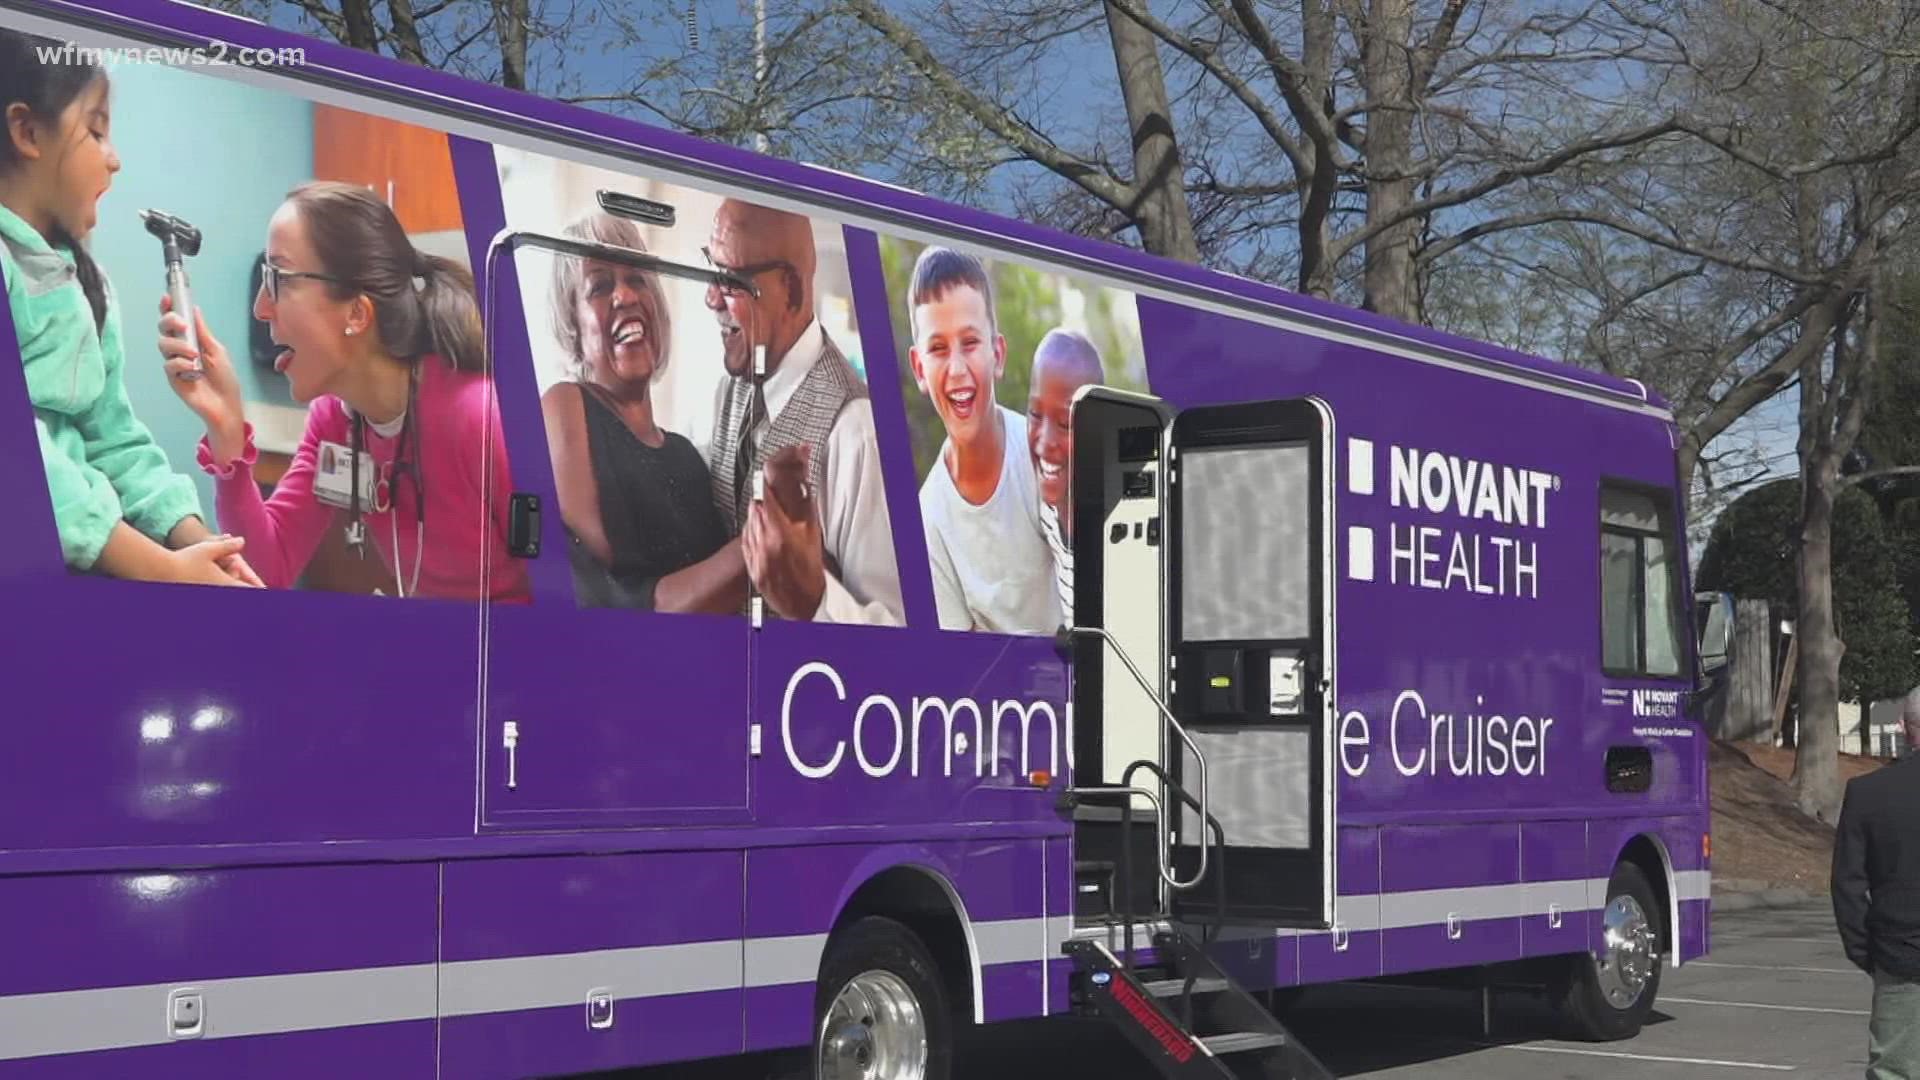 The health care system said they’ve heard the communities concerns about access to health care and have come up with a solution with a 38-foot-long mobile care unit.